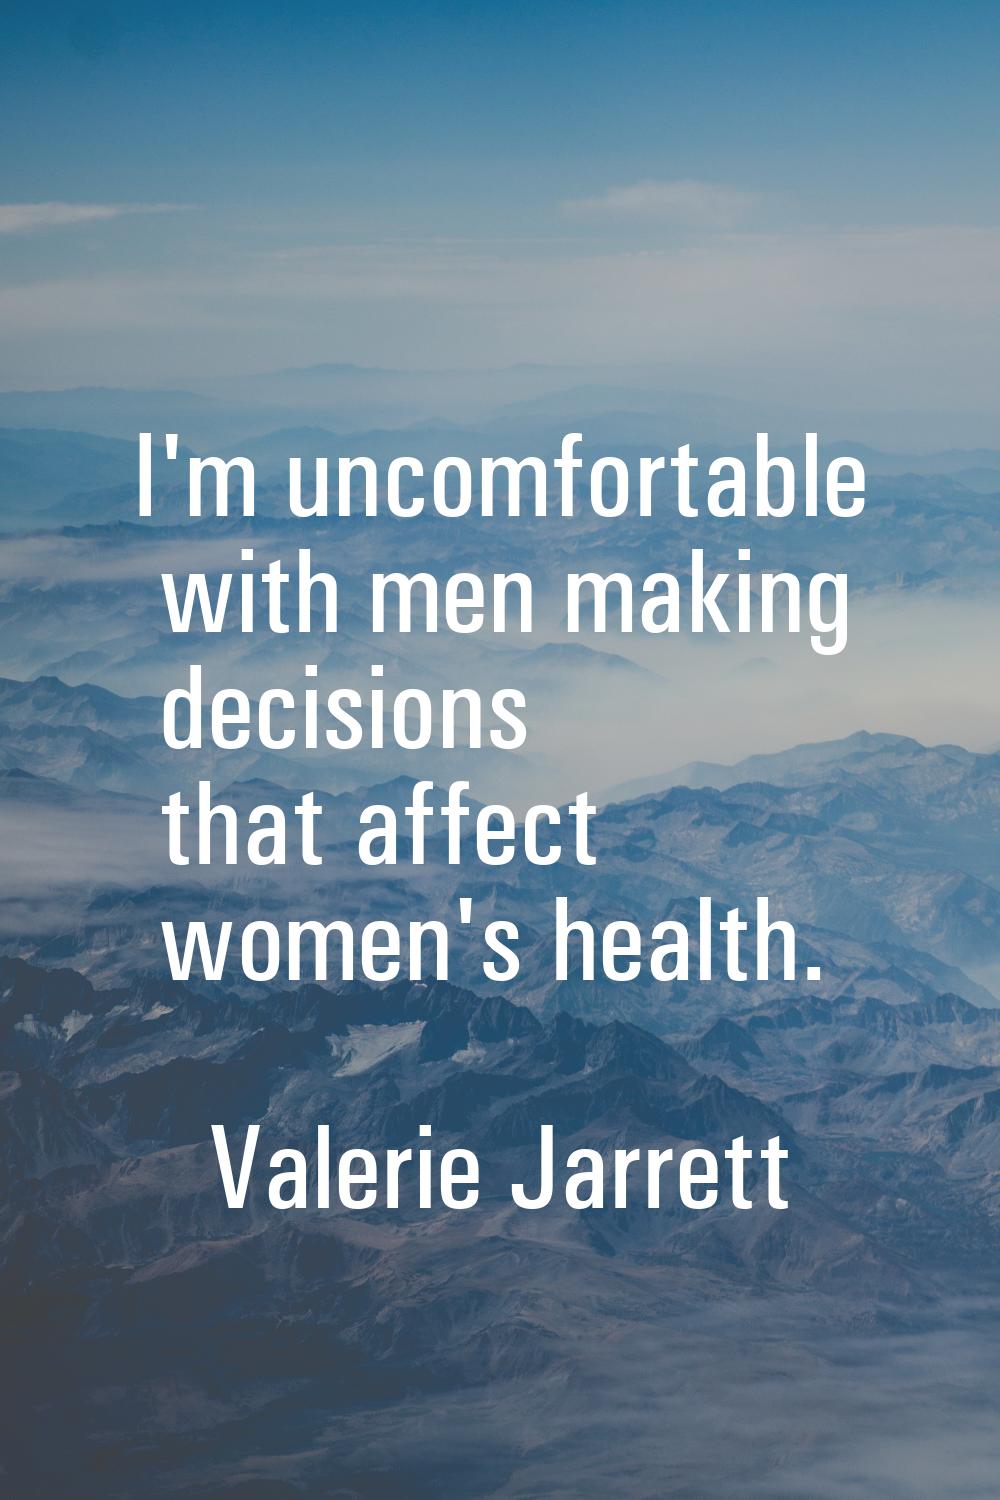 I'm uncomfortable with men making decisions that affect women's health.